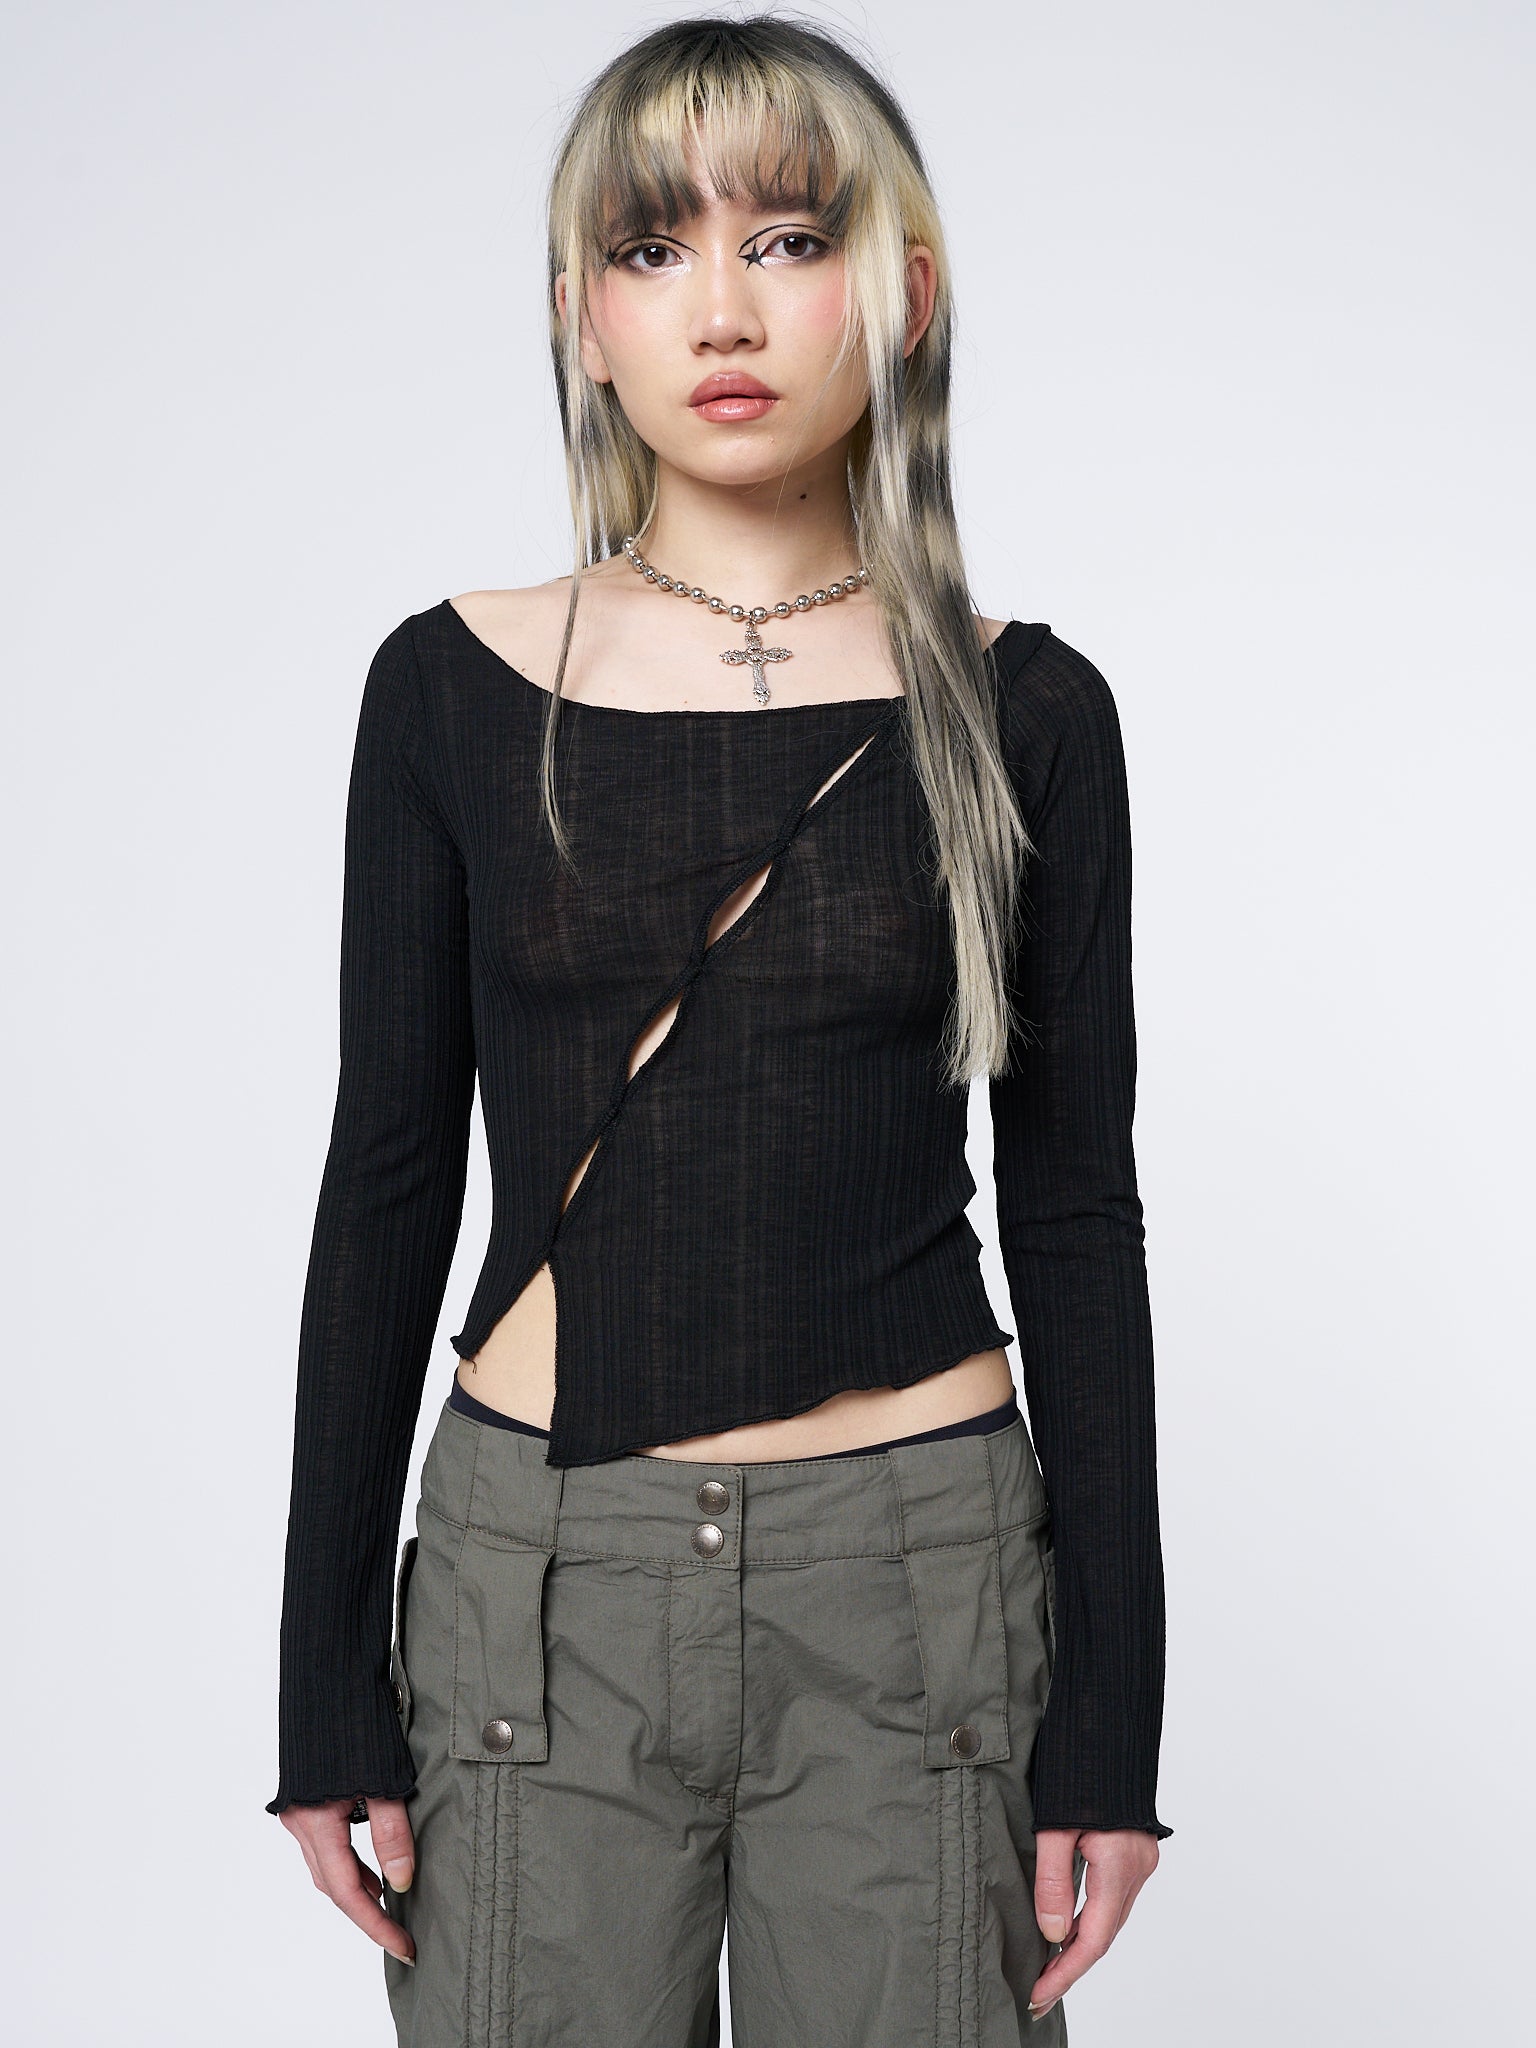 A grunge-inspired long sleeve top with edgy asymmetrical cut-out details. Perfect for a rebellious and bold style statement.